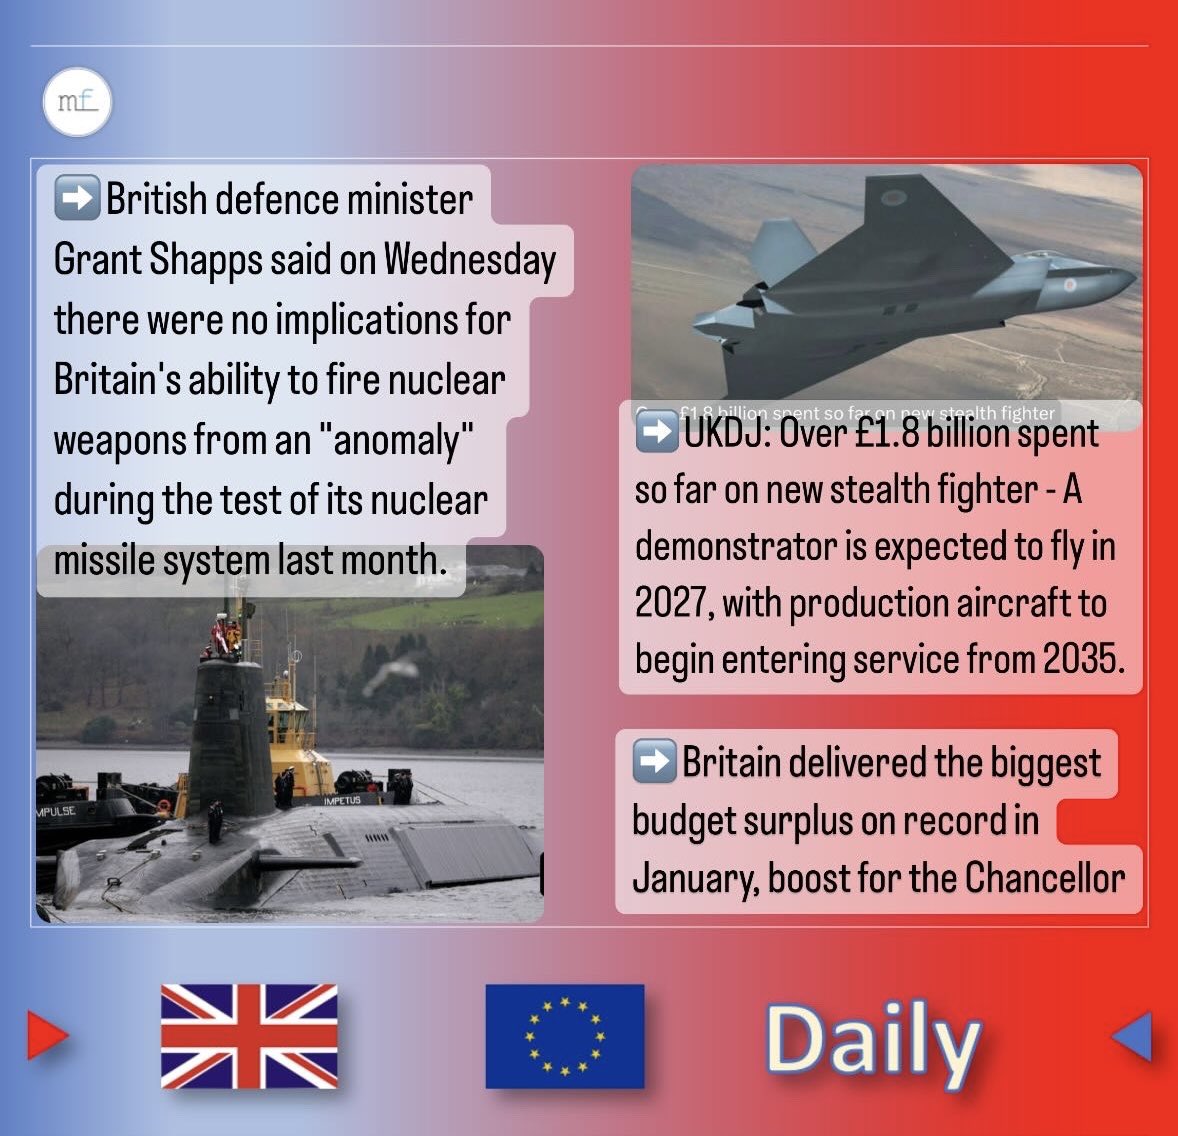 #Brexit daily #BrexitNews day 1️⃣1️⃣4️⃣7️⃣ #energytransition #trade #supplychain #business #logistics #Logistik #trade #export #import #customs #Finance #motionfinity #finances #financialservices #GDP #ukca #research #Science #space